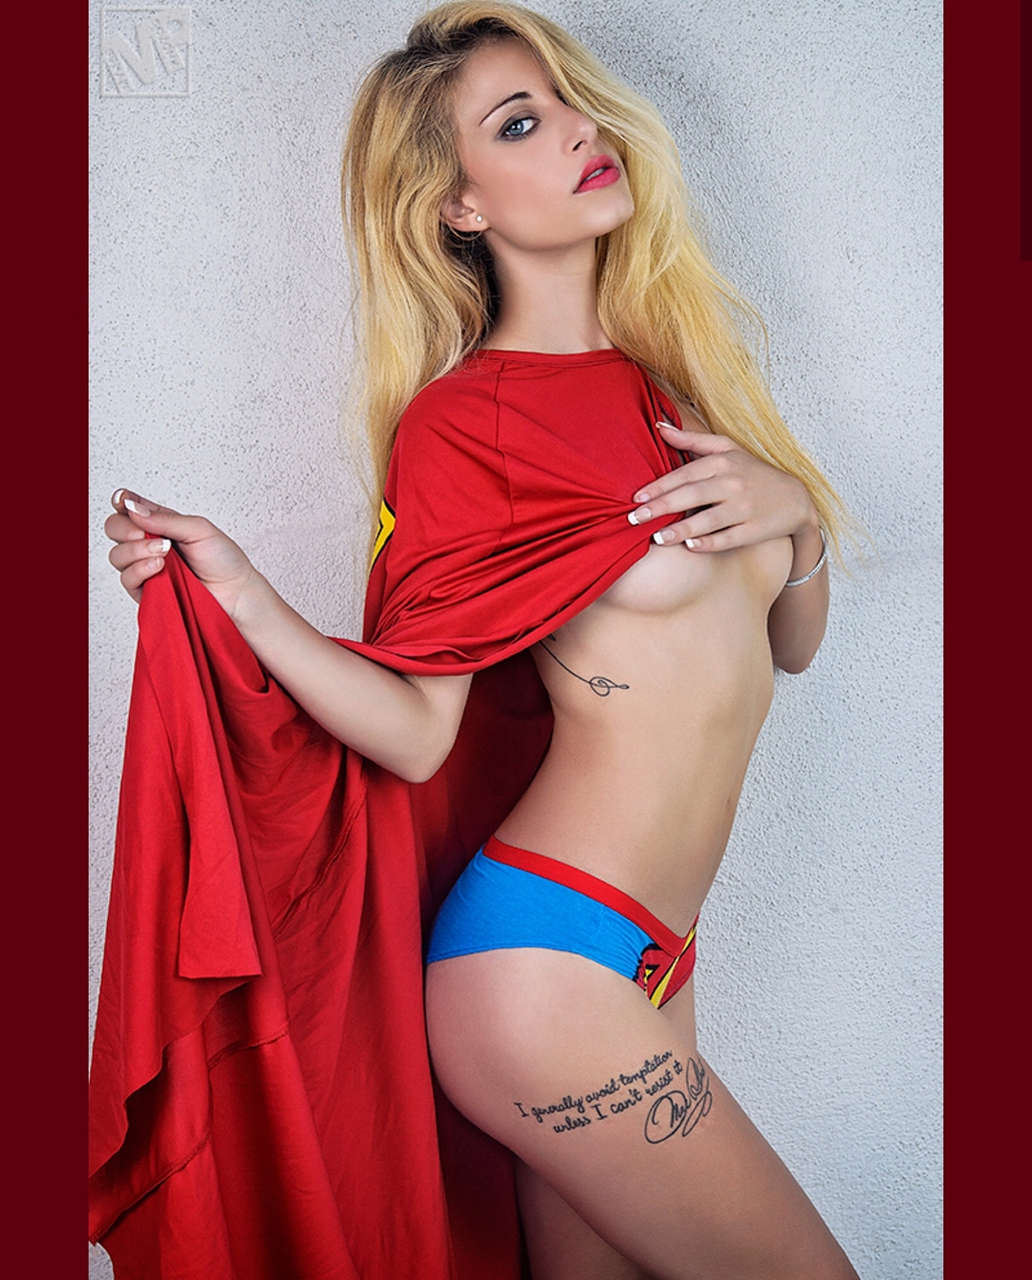 Supergirl By Dbsciacc